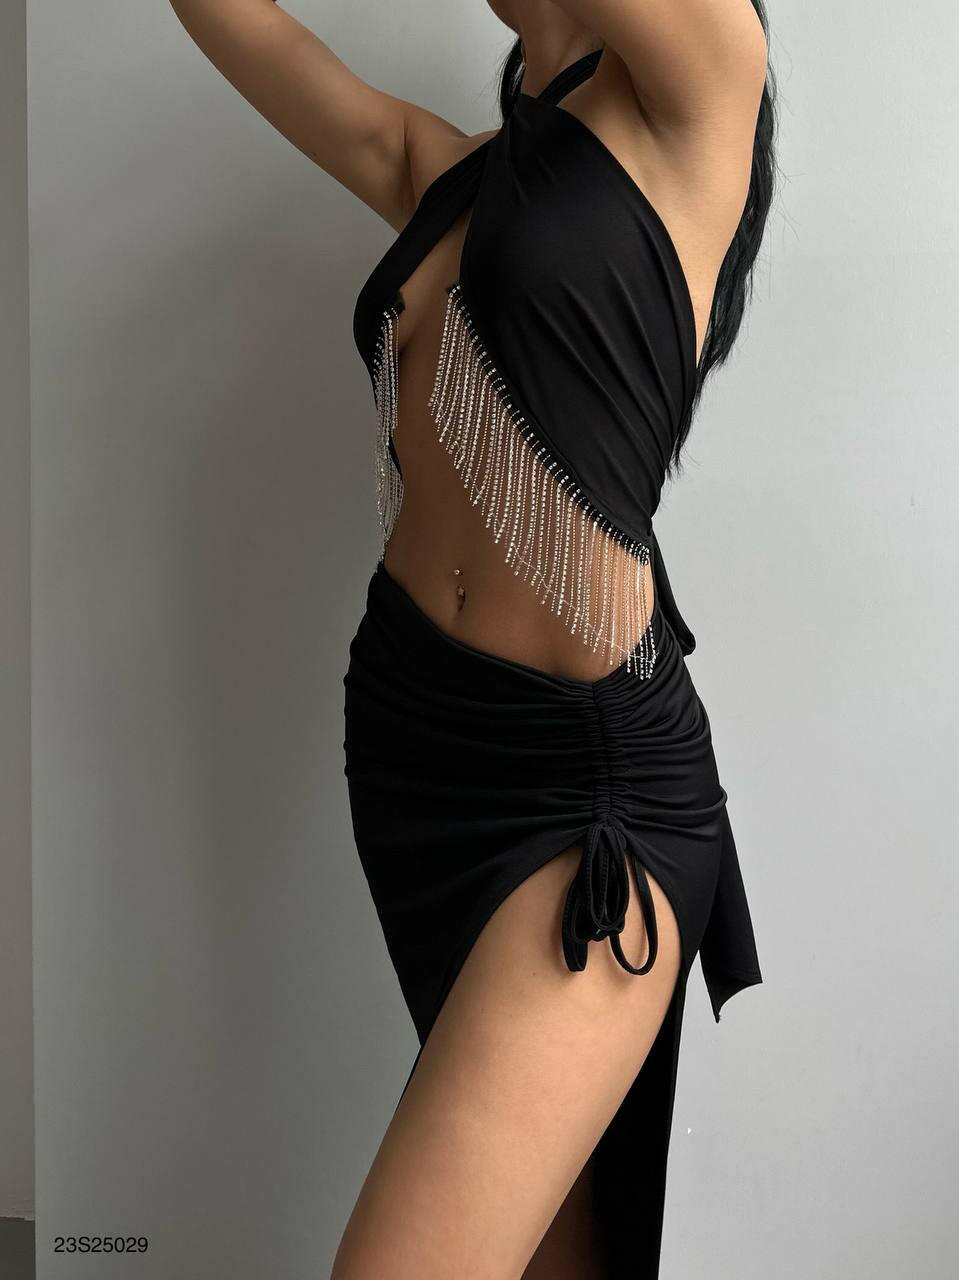 Rhinestone Tassels Party Dresses Cut Out Halter Backless Two Piece Long Dress BF23S25029 Black